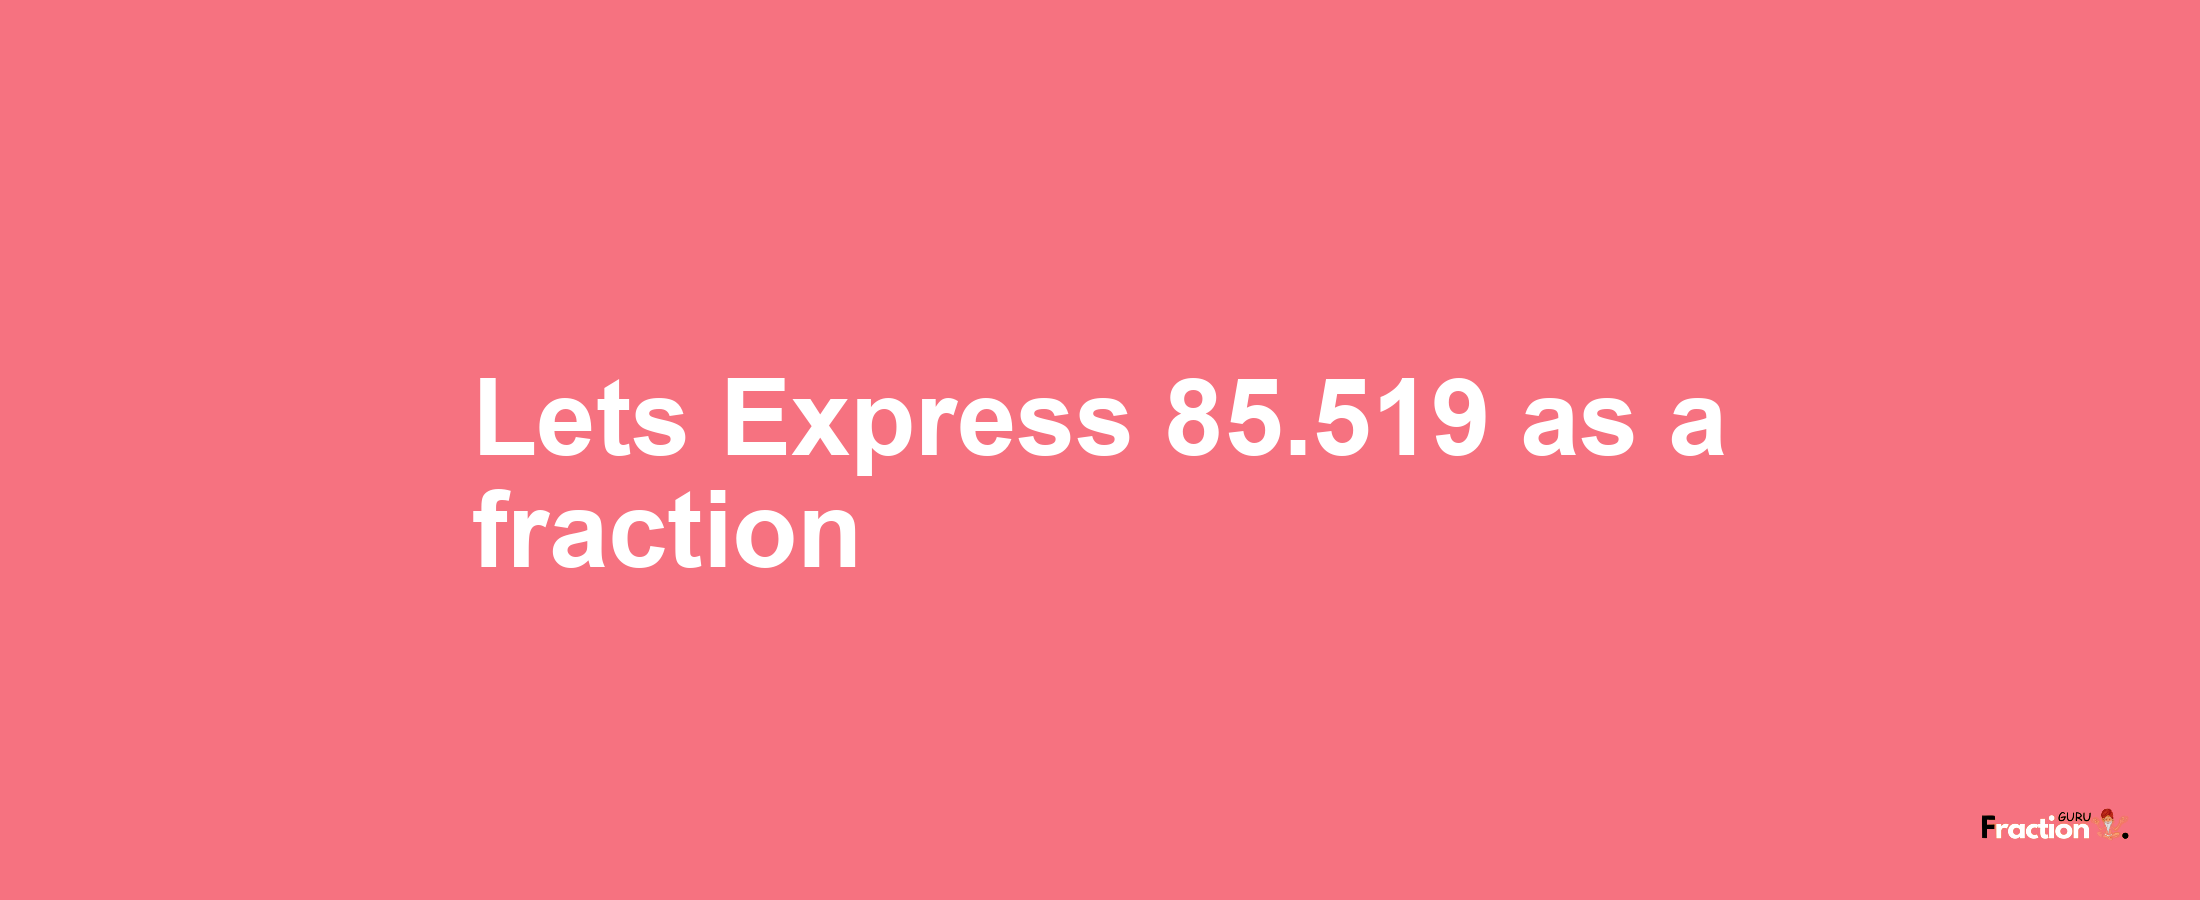 Lets Express 85.519 as afraction